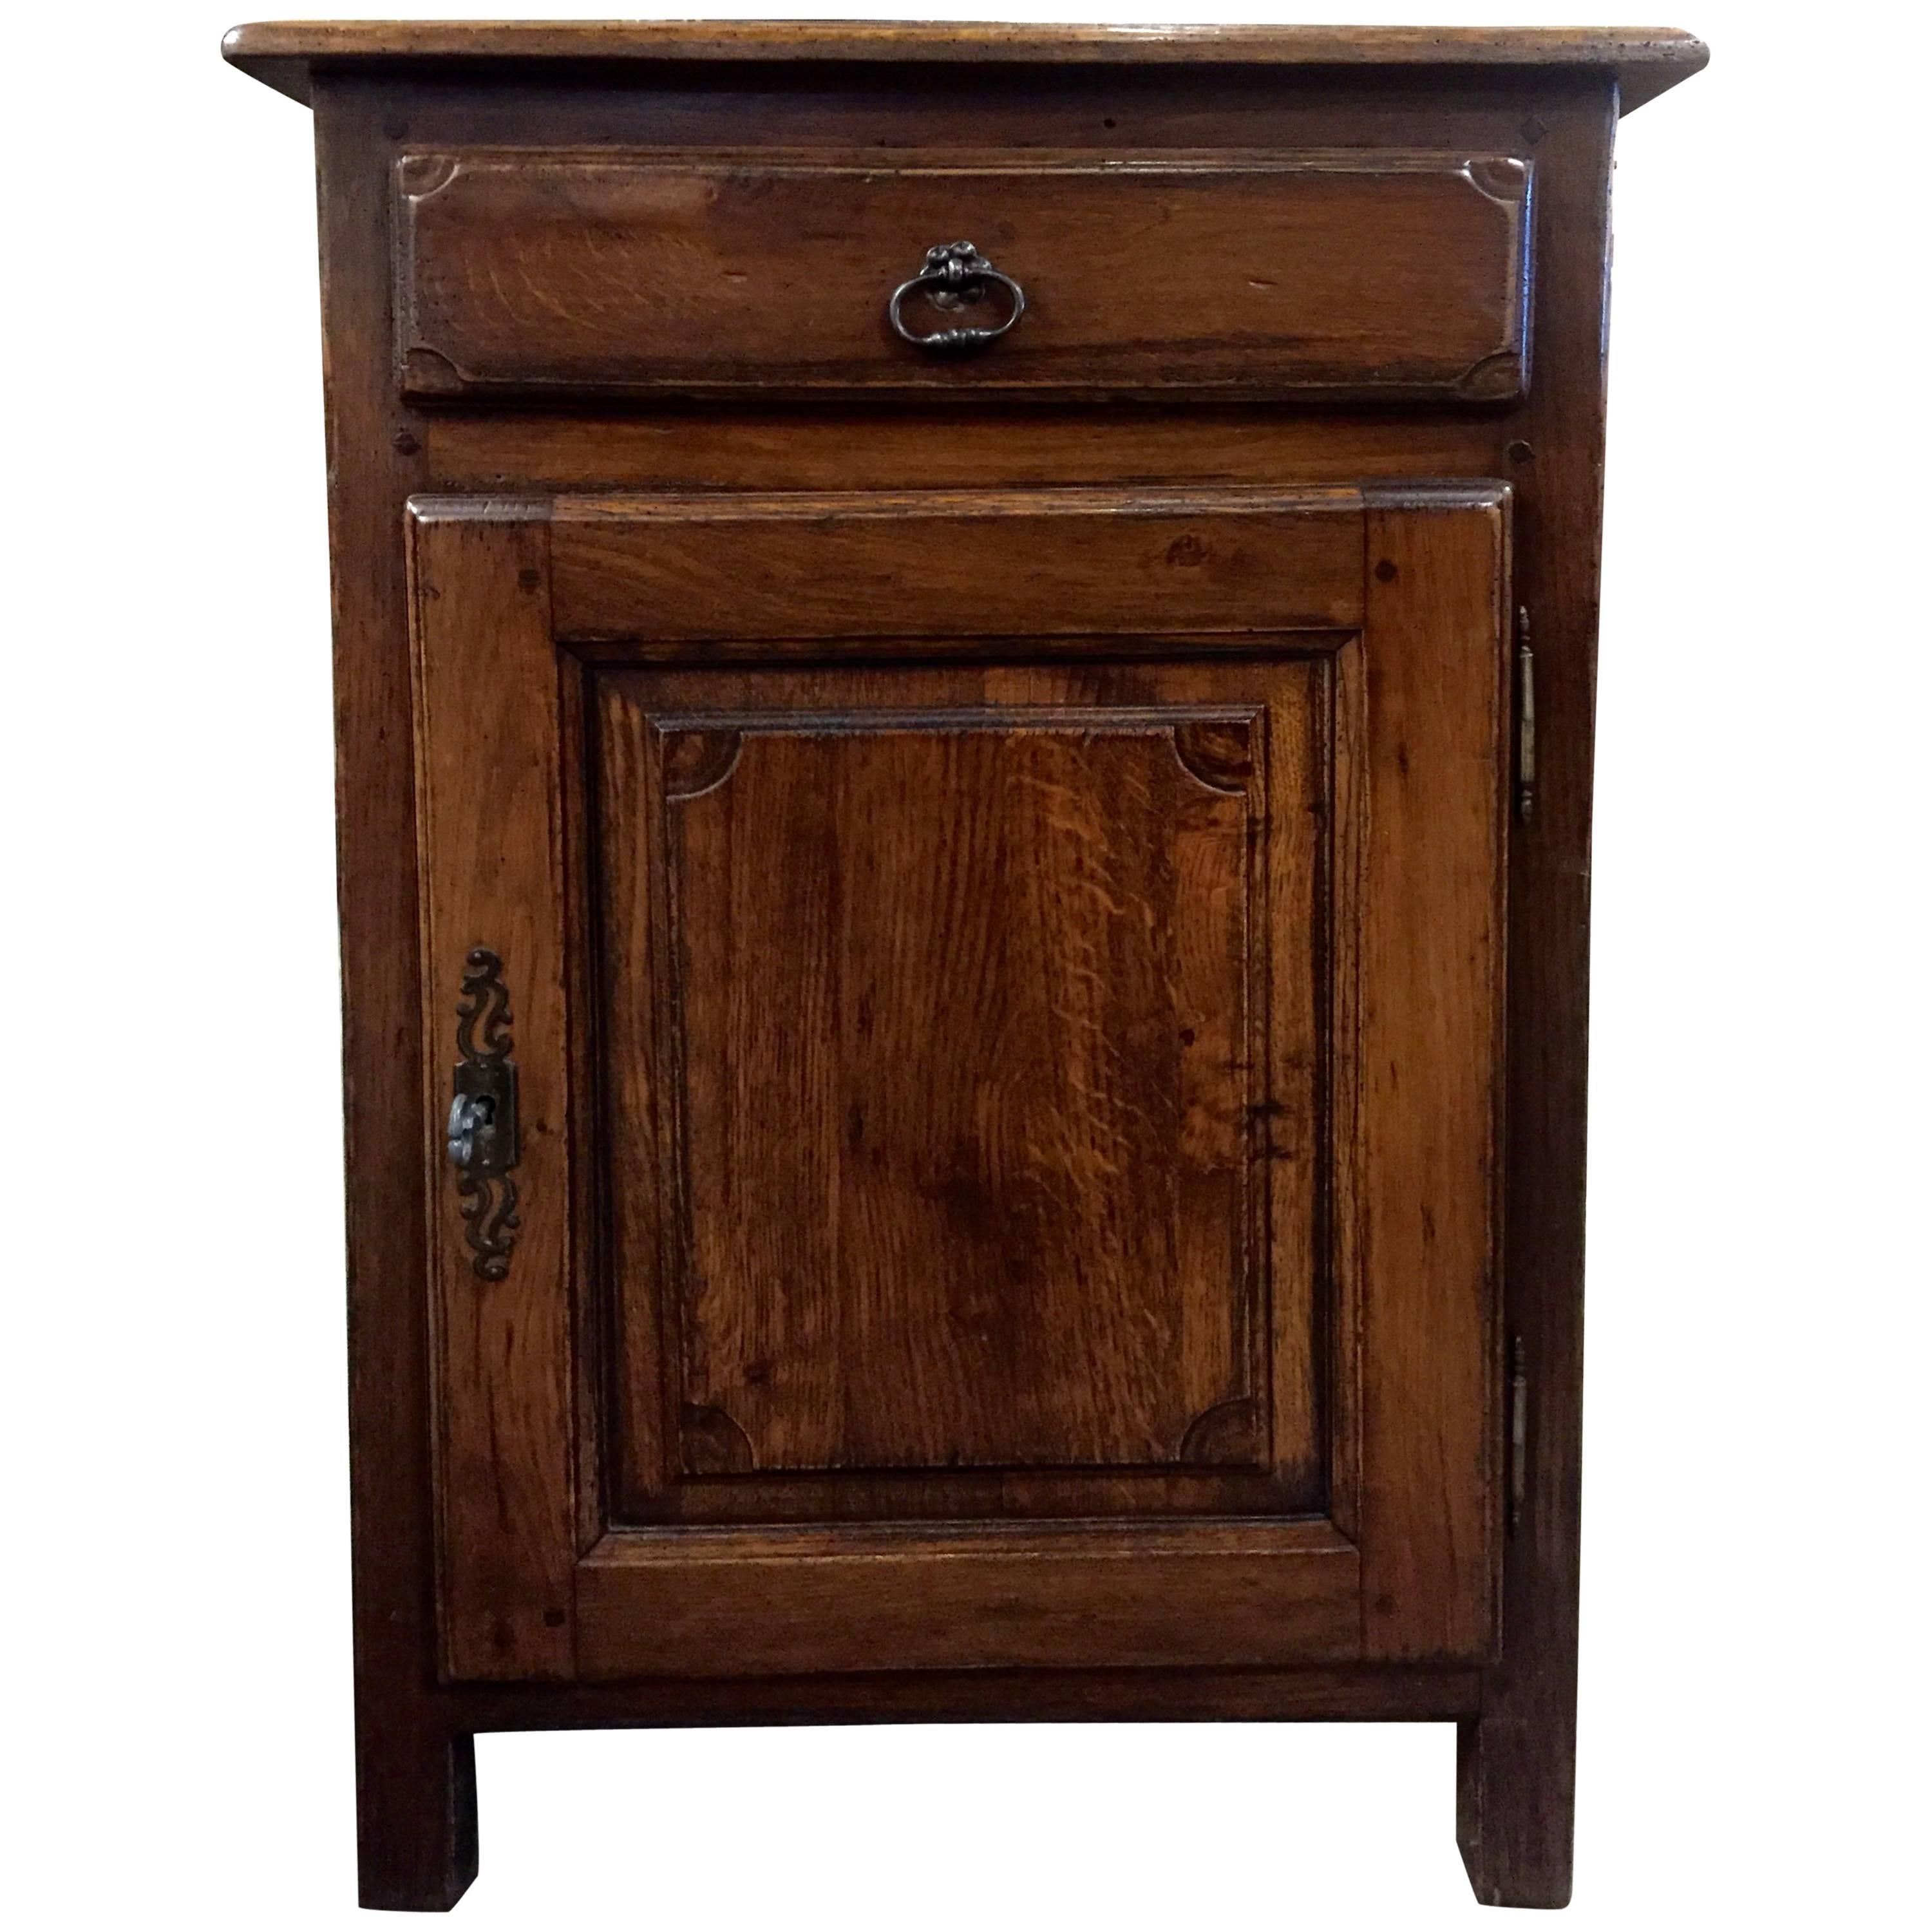 Rustic Louis XIV Style 19th Century French Jam Cabinet Handmade of Oak